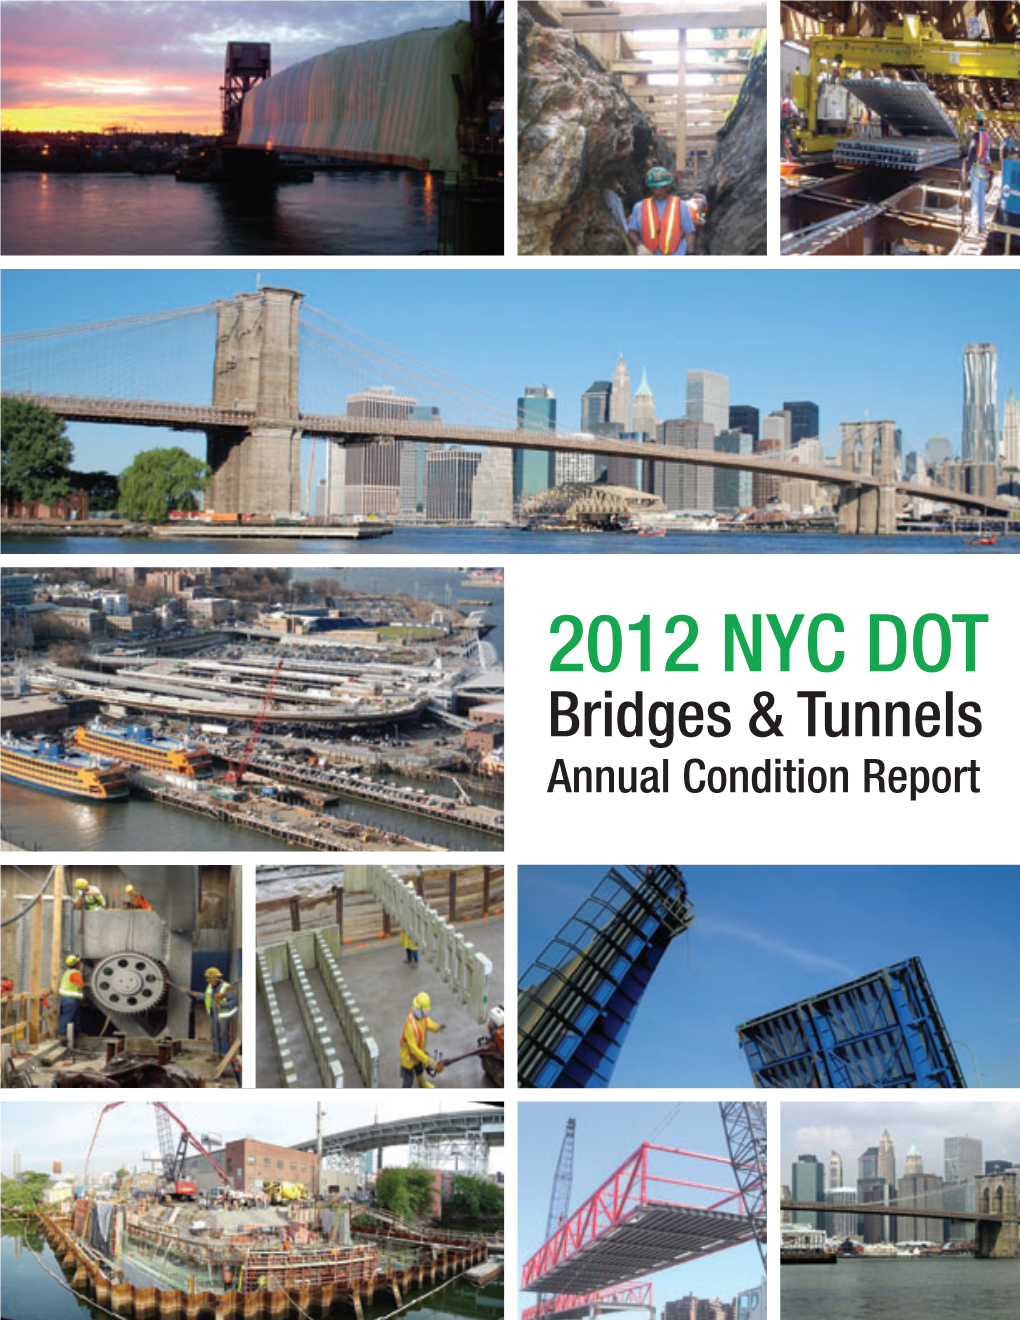 2012 NYC DOT Bridges and Tunnels Annual Condition Report